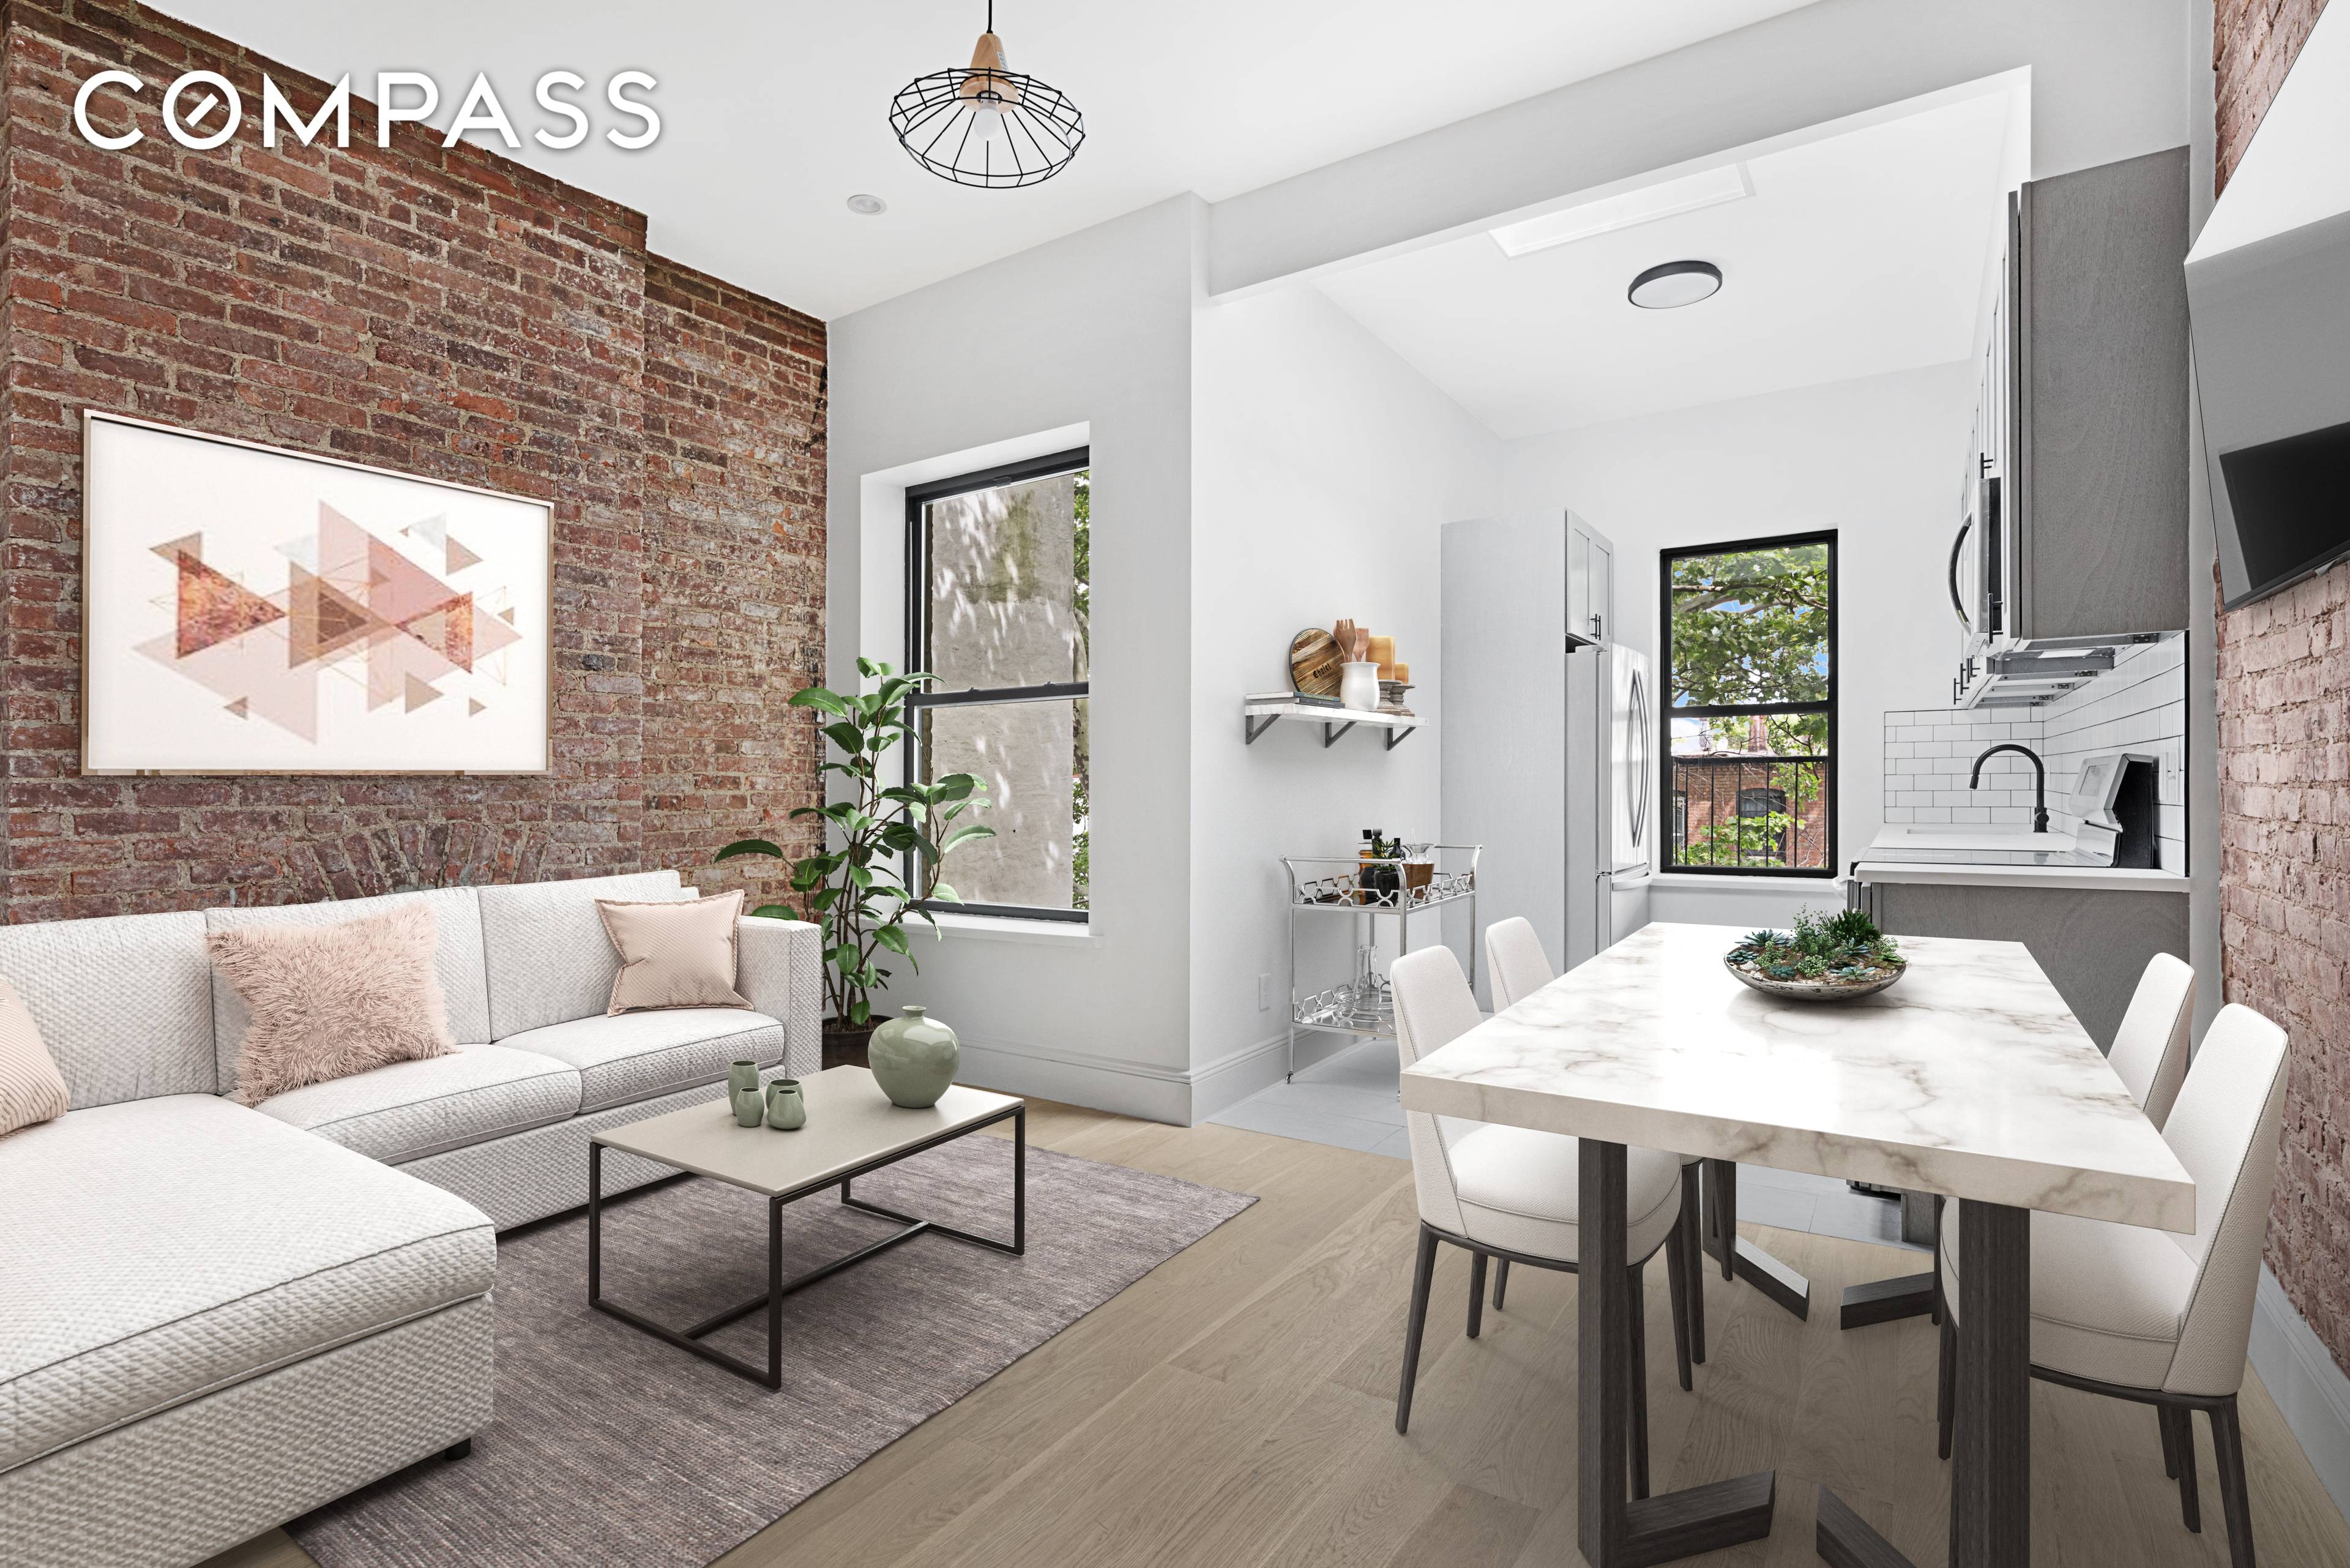 Bedford Stuyvesant welcomes luxurious condominium finishes and top notch amenities at The Homage, a brand new rental living experience nestled in classic prewar bones.